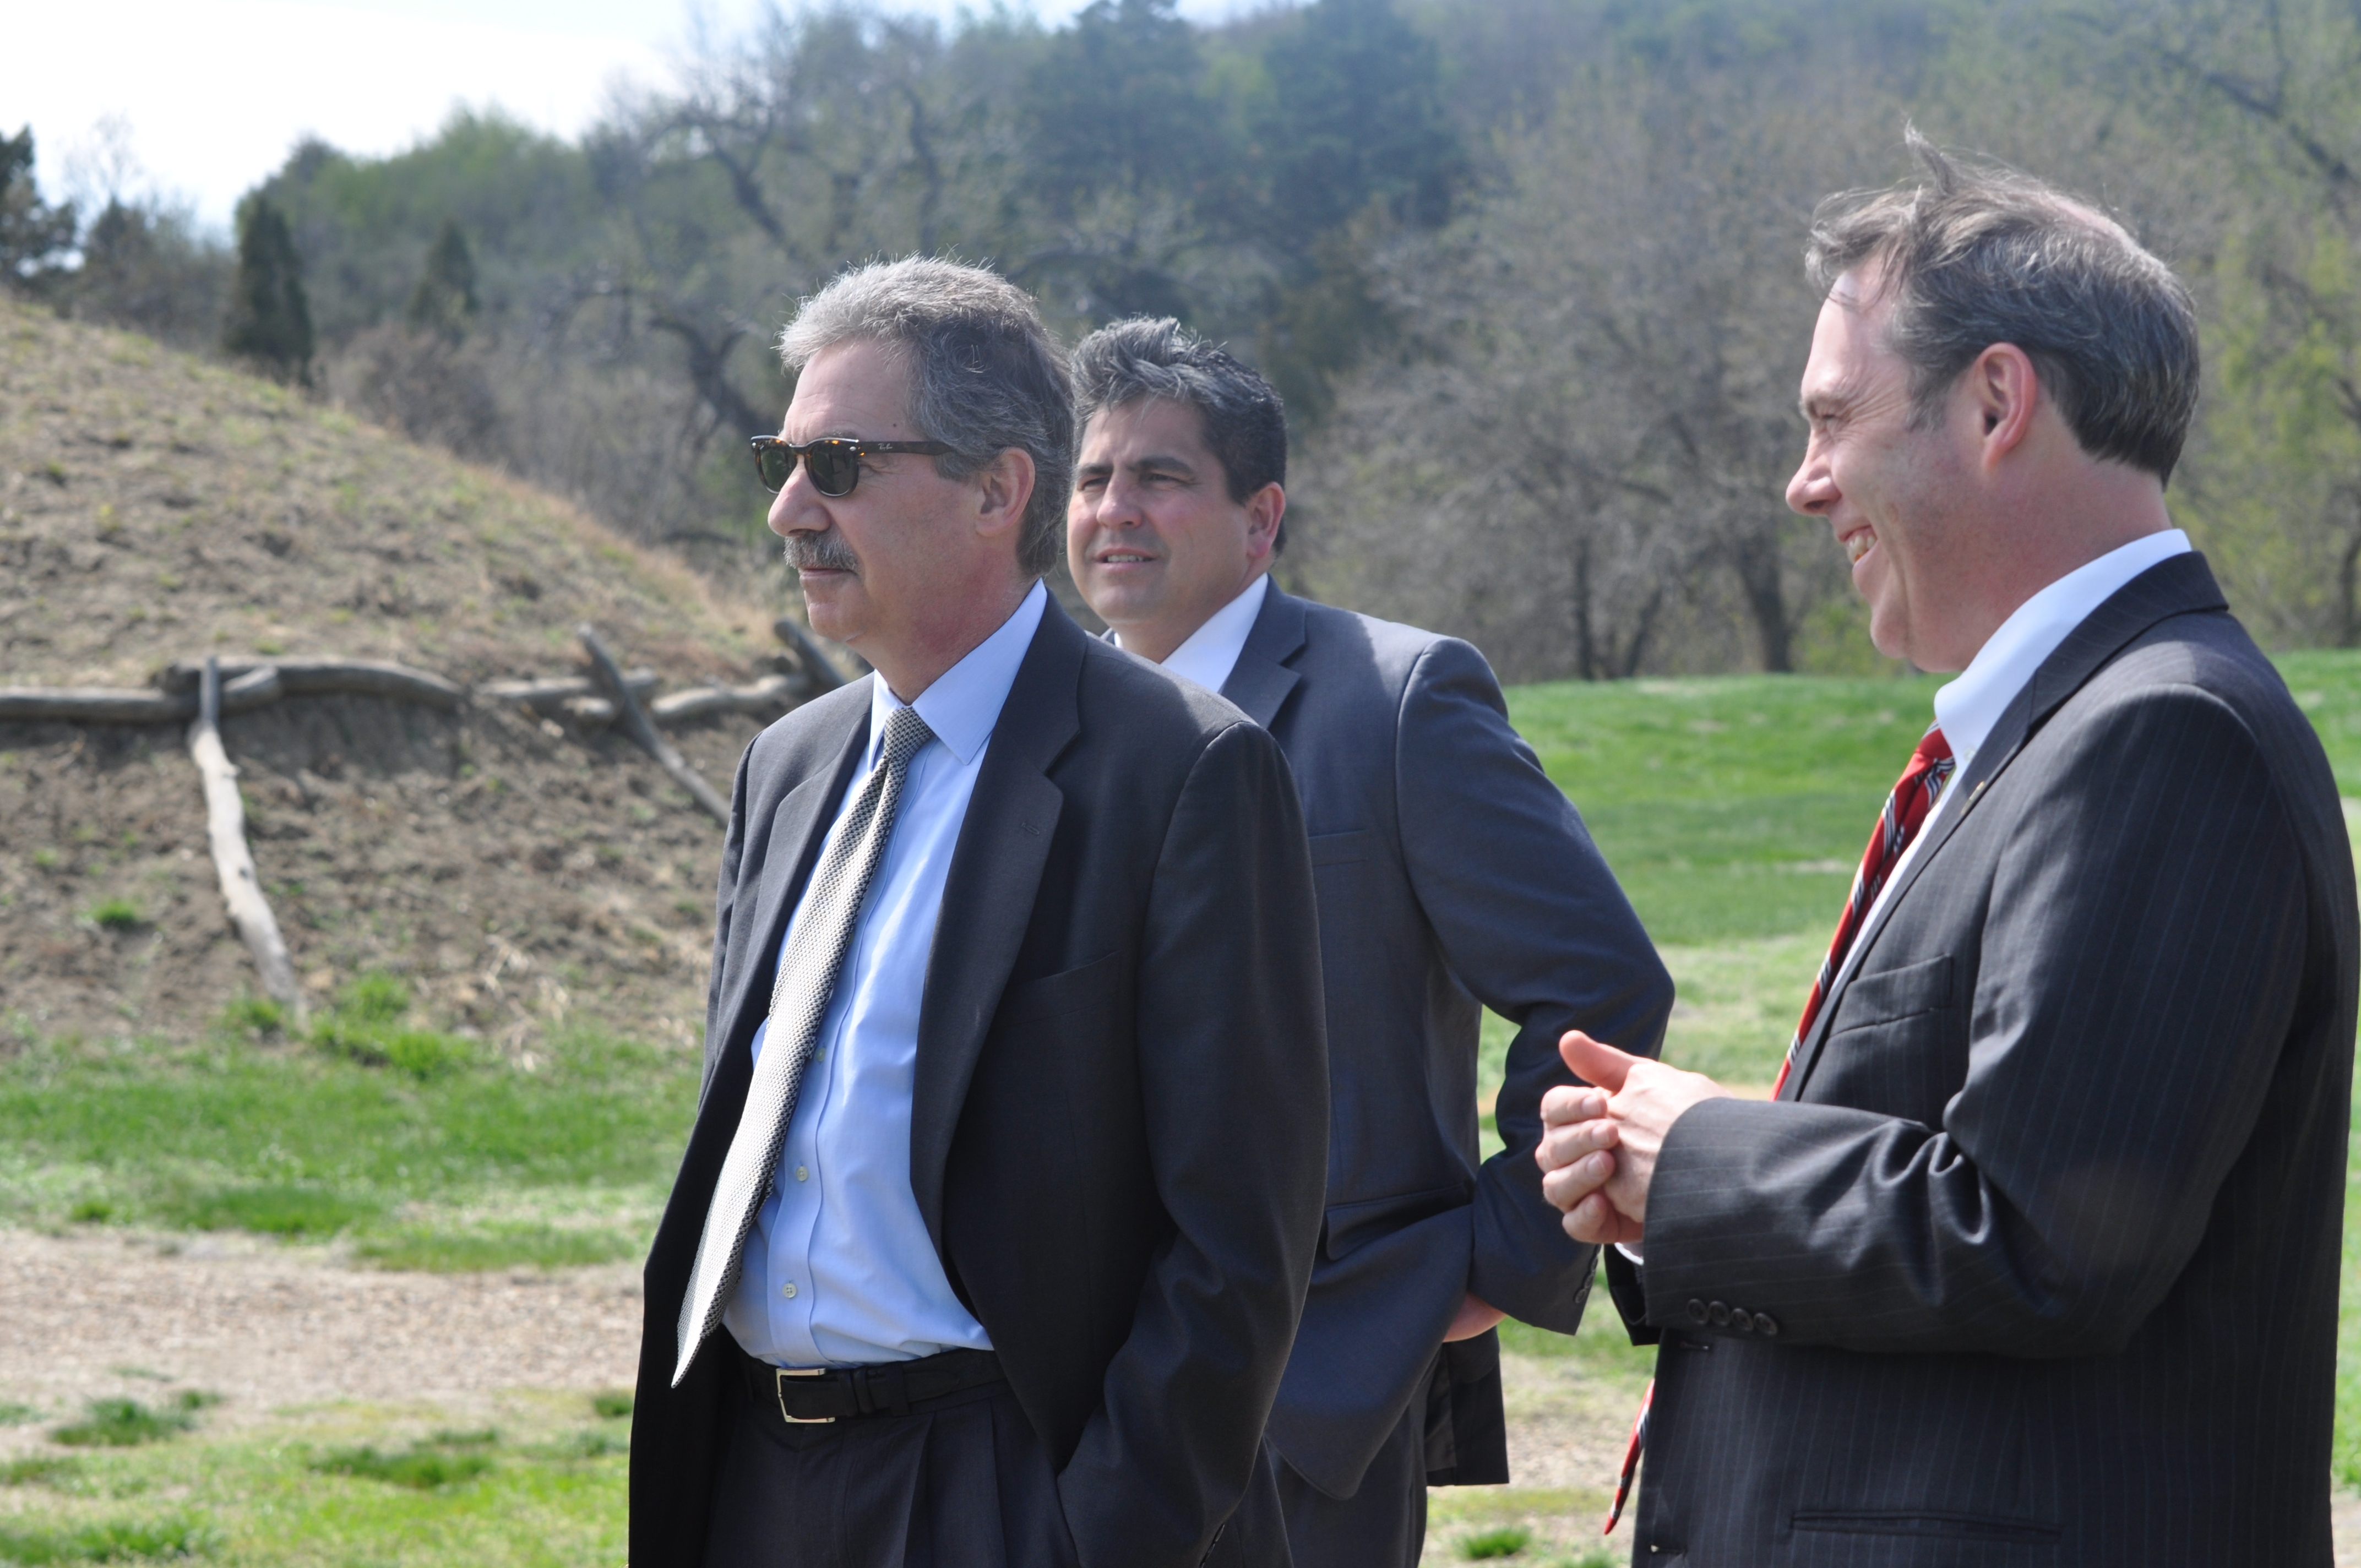 DAG Cole,  AAG Gary Delorme and U.S. Attorney Tim Purdon at the recreated Mandan Village at the Fort Abraham Lincoln State Park